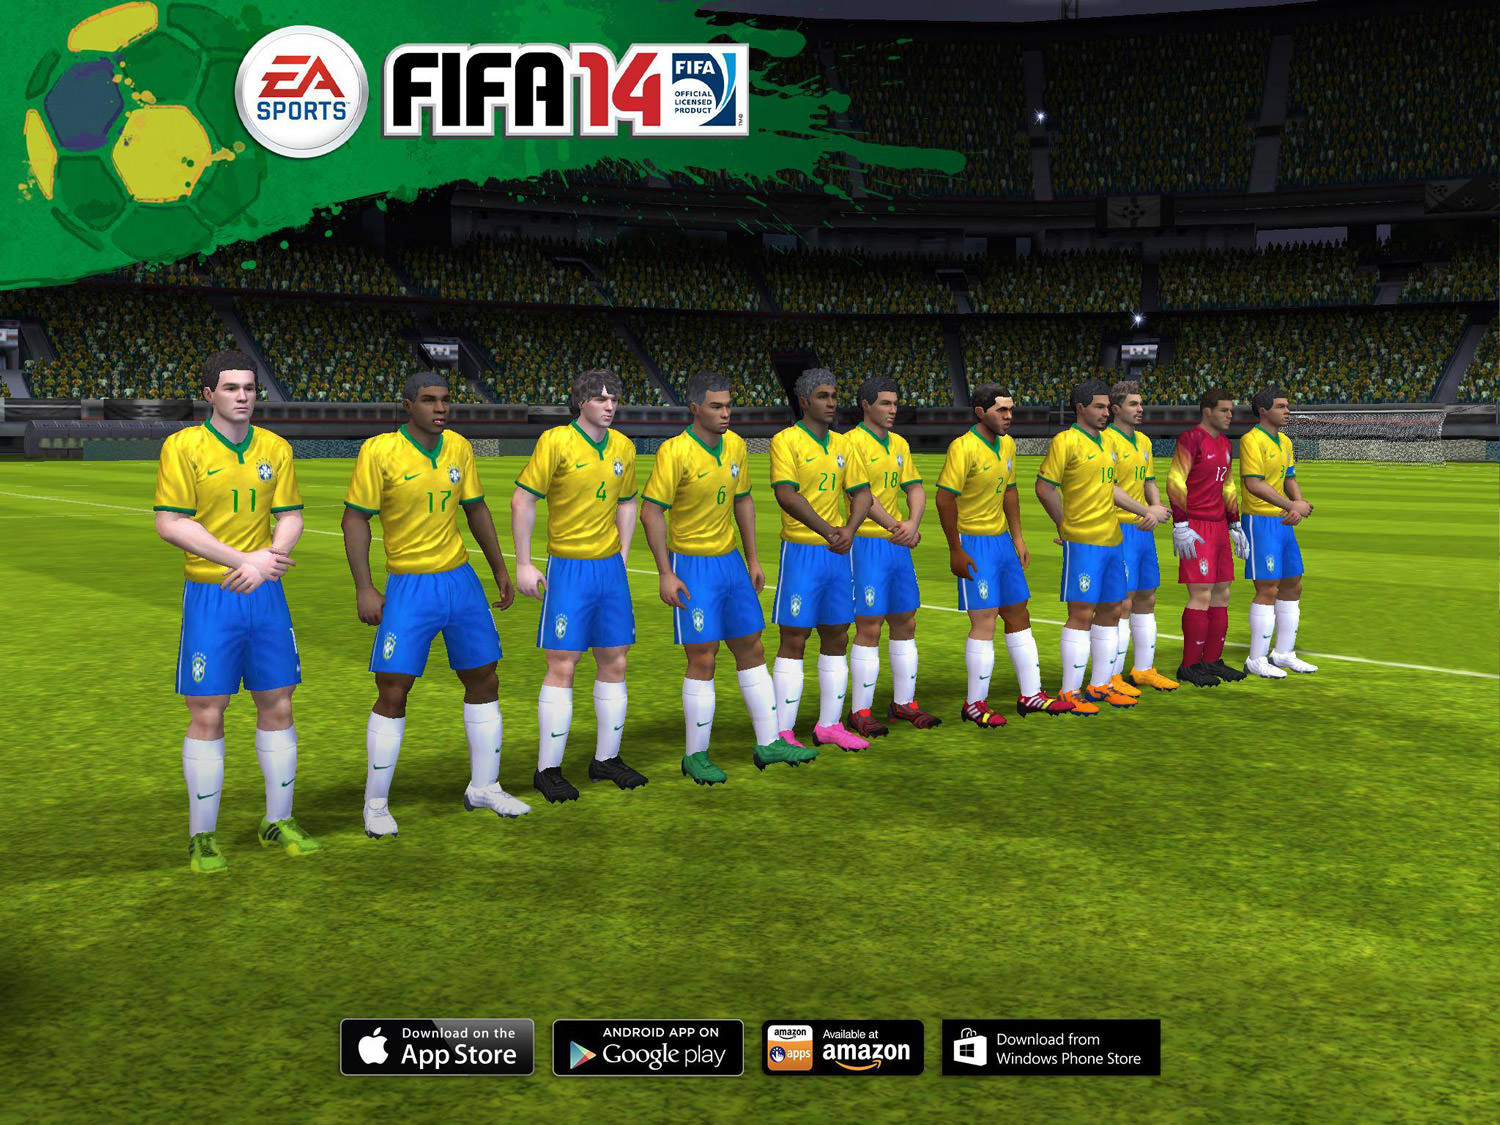 FIFA 14 Mobile - 2014 FIFA World Cup Brazil Update